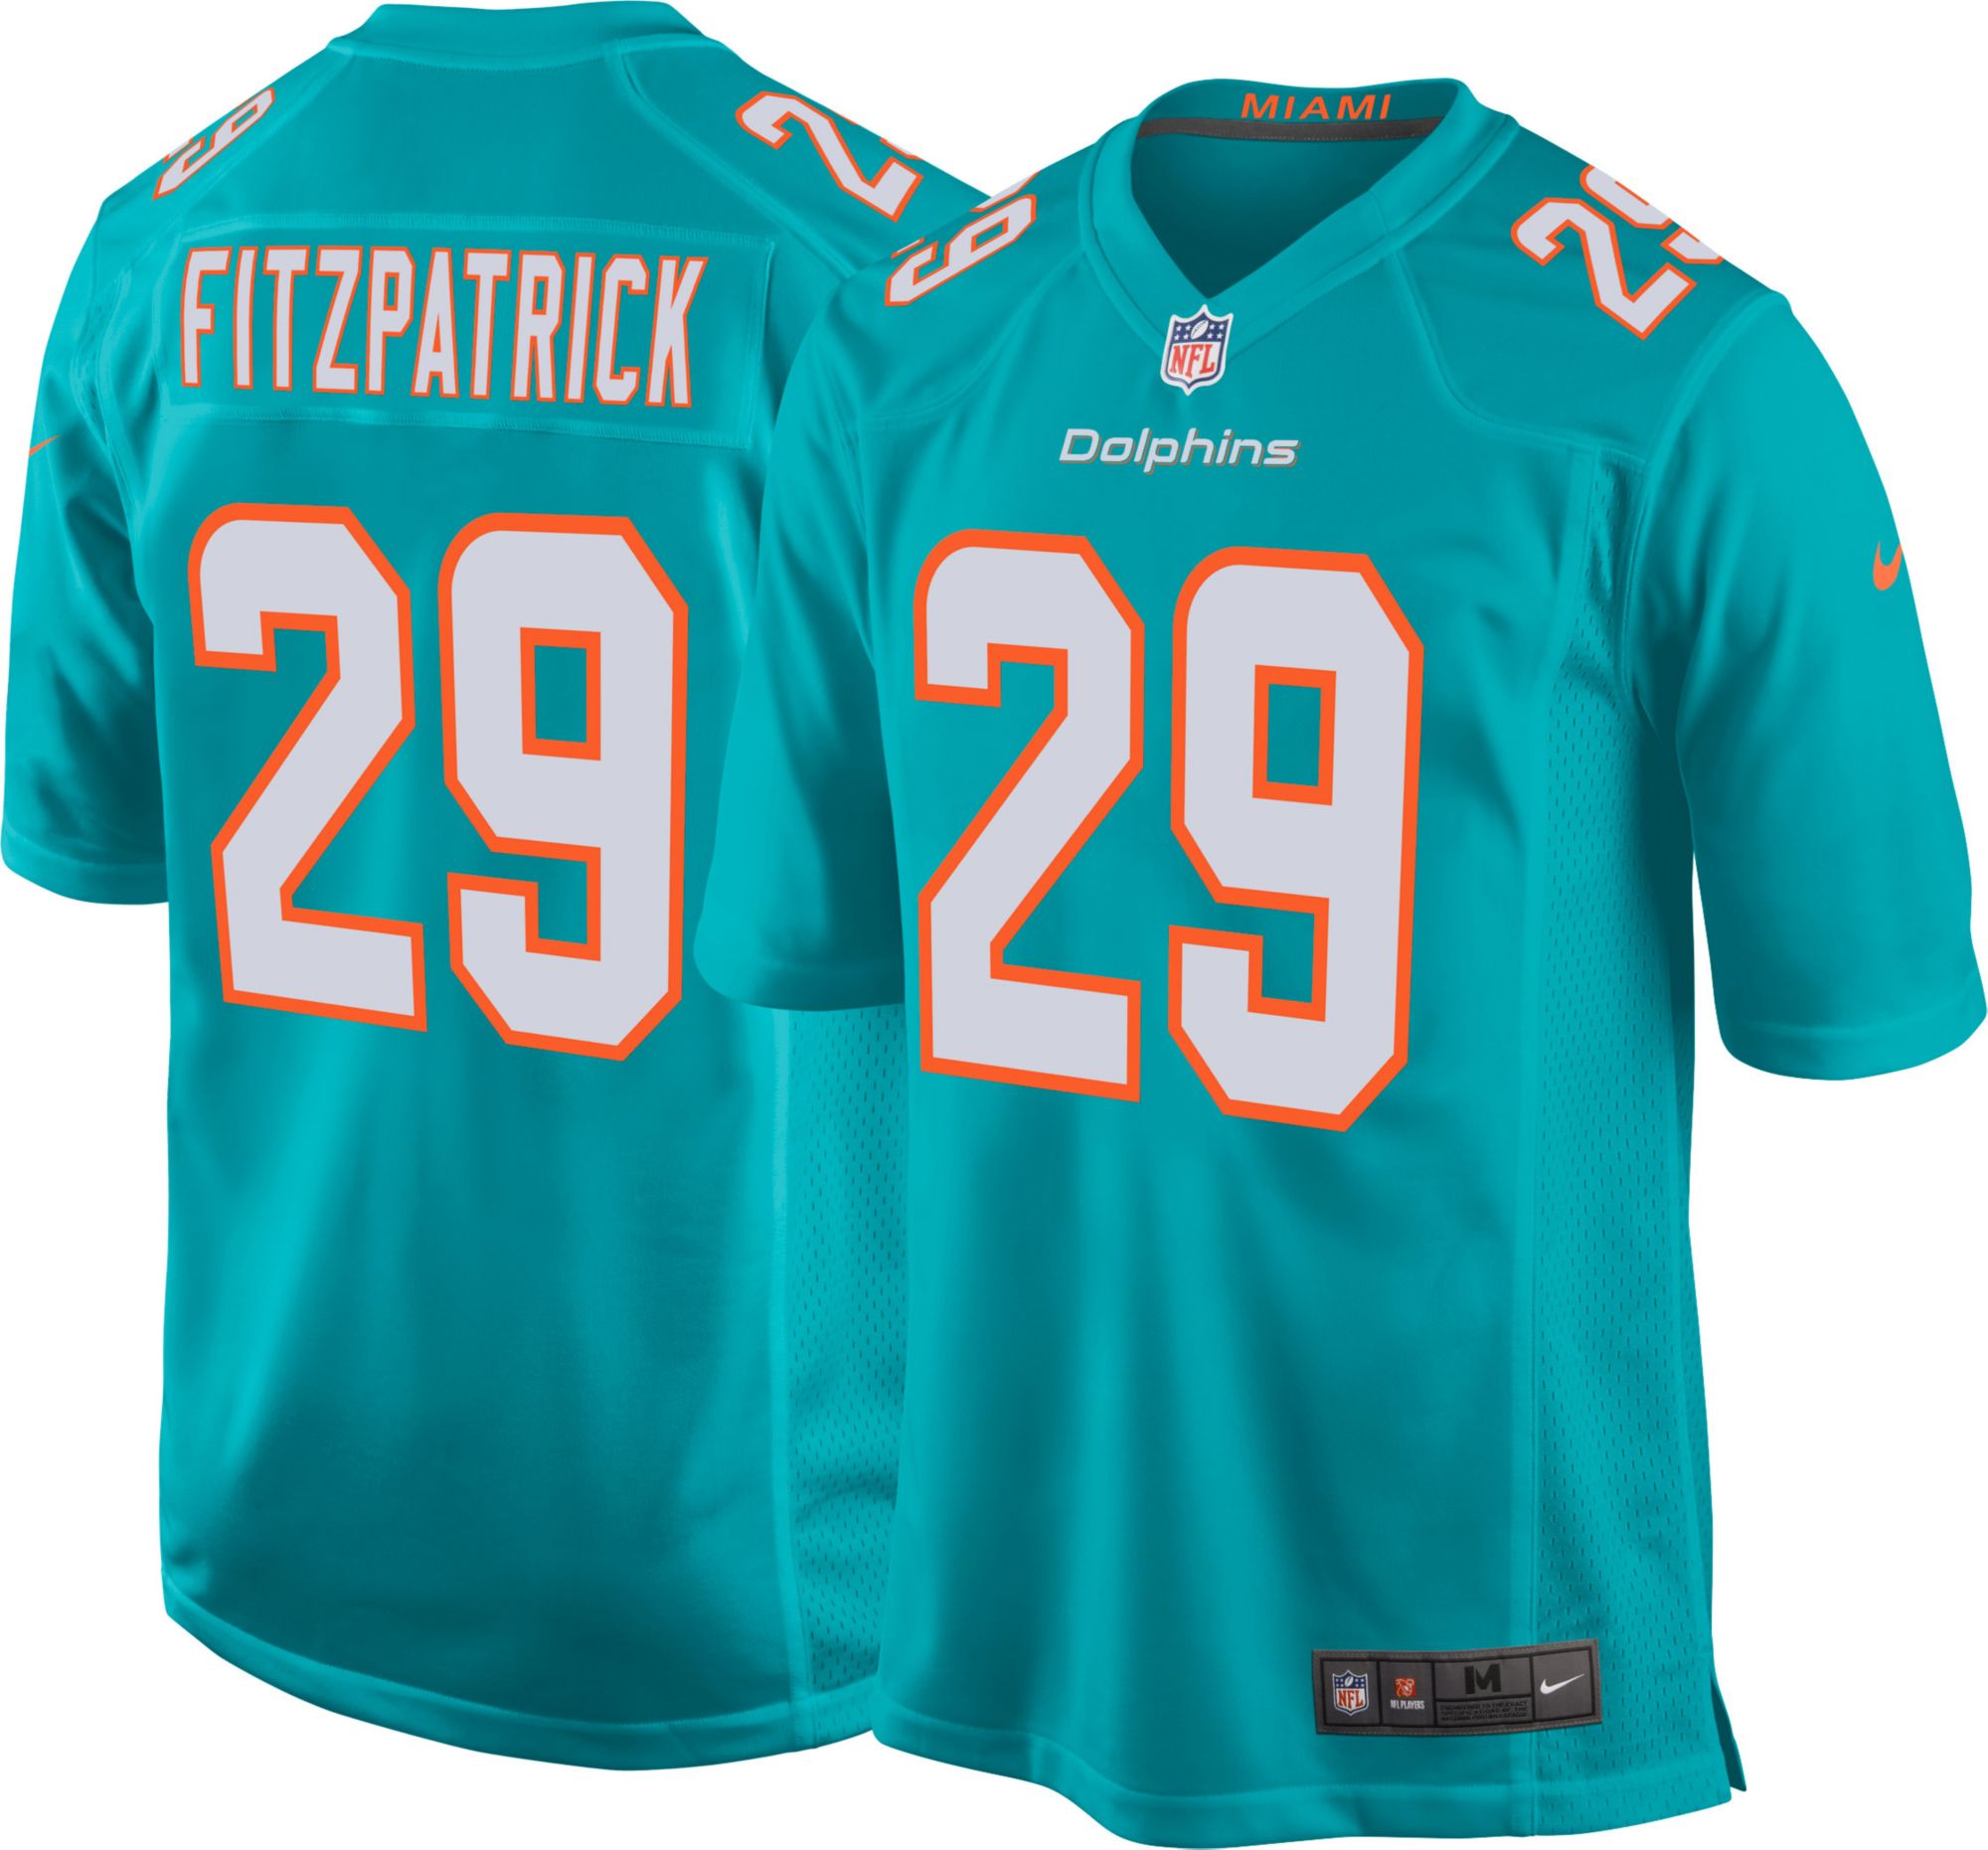 miami dolphins female jersey